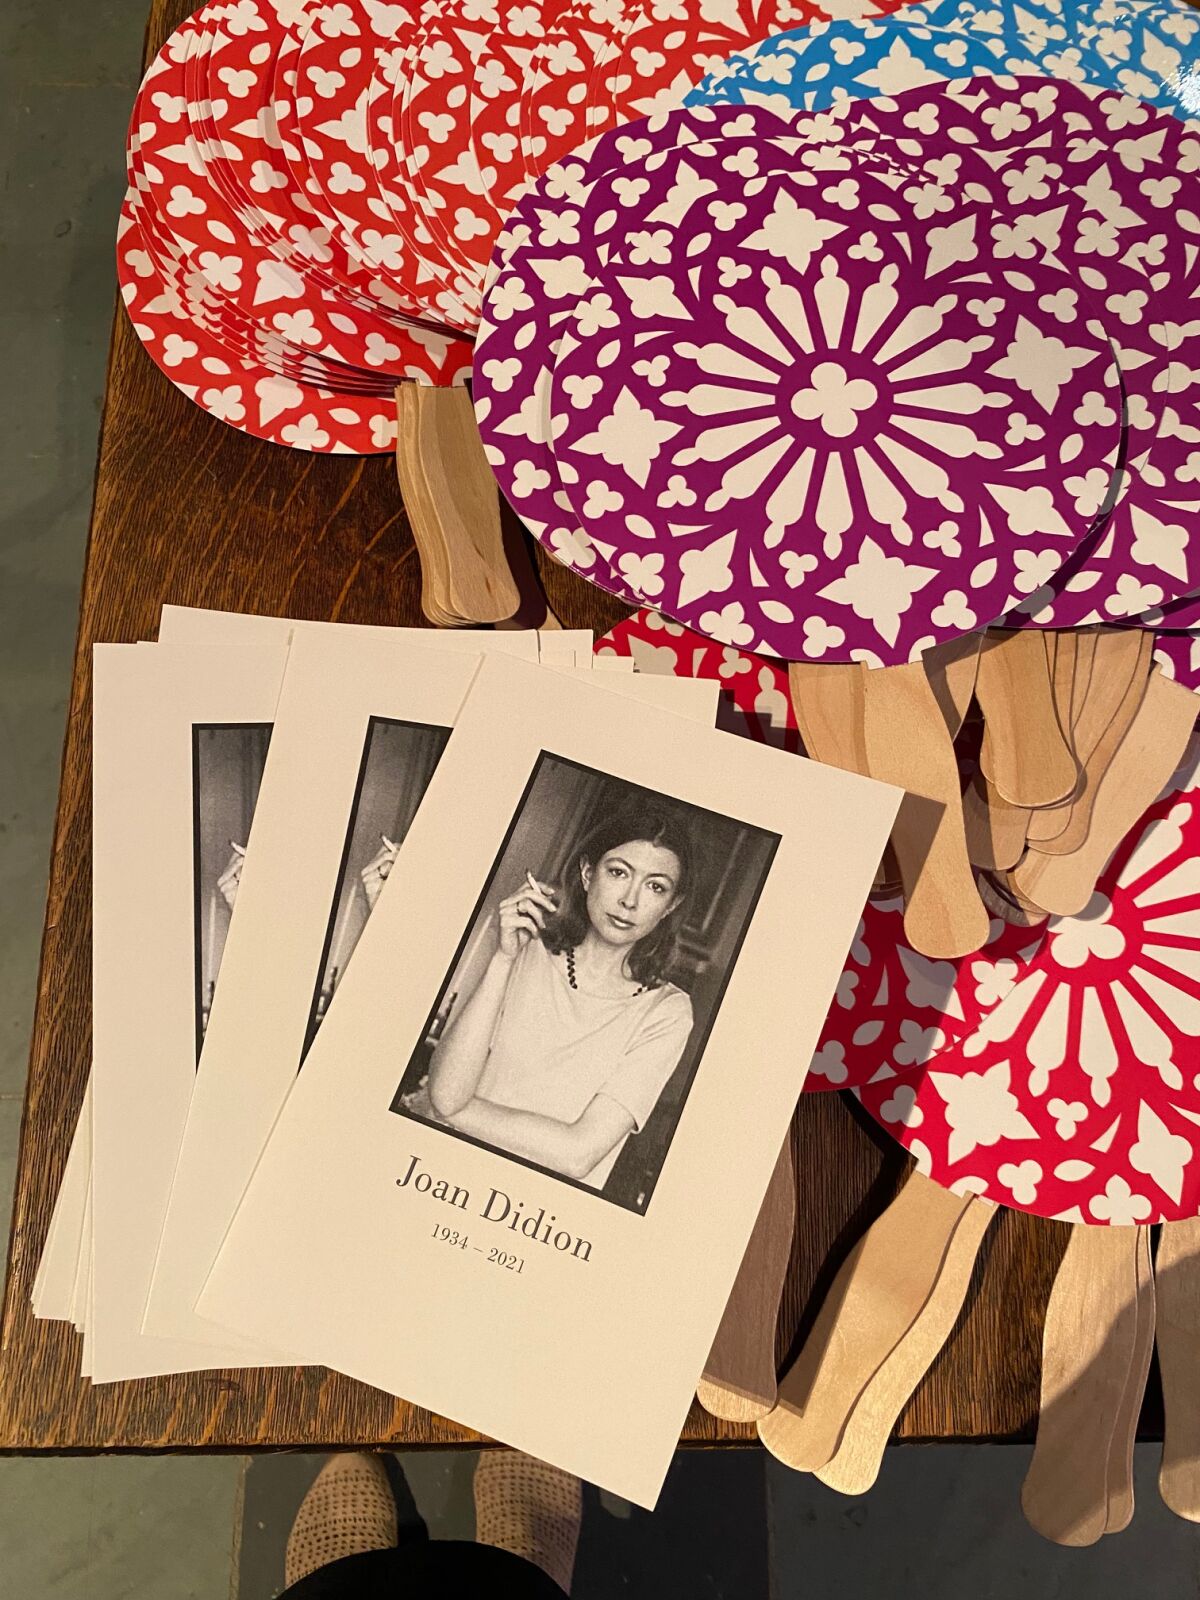 An assortment of programs and hand fans at Wednesday's memorial tribute to Joan Didion in New York.